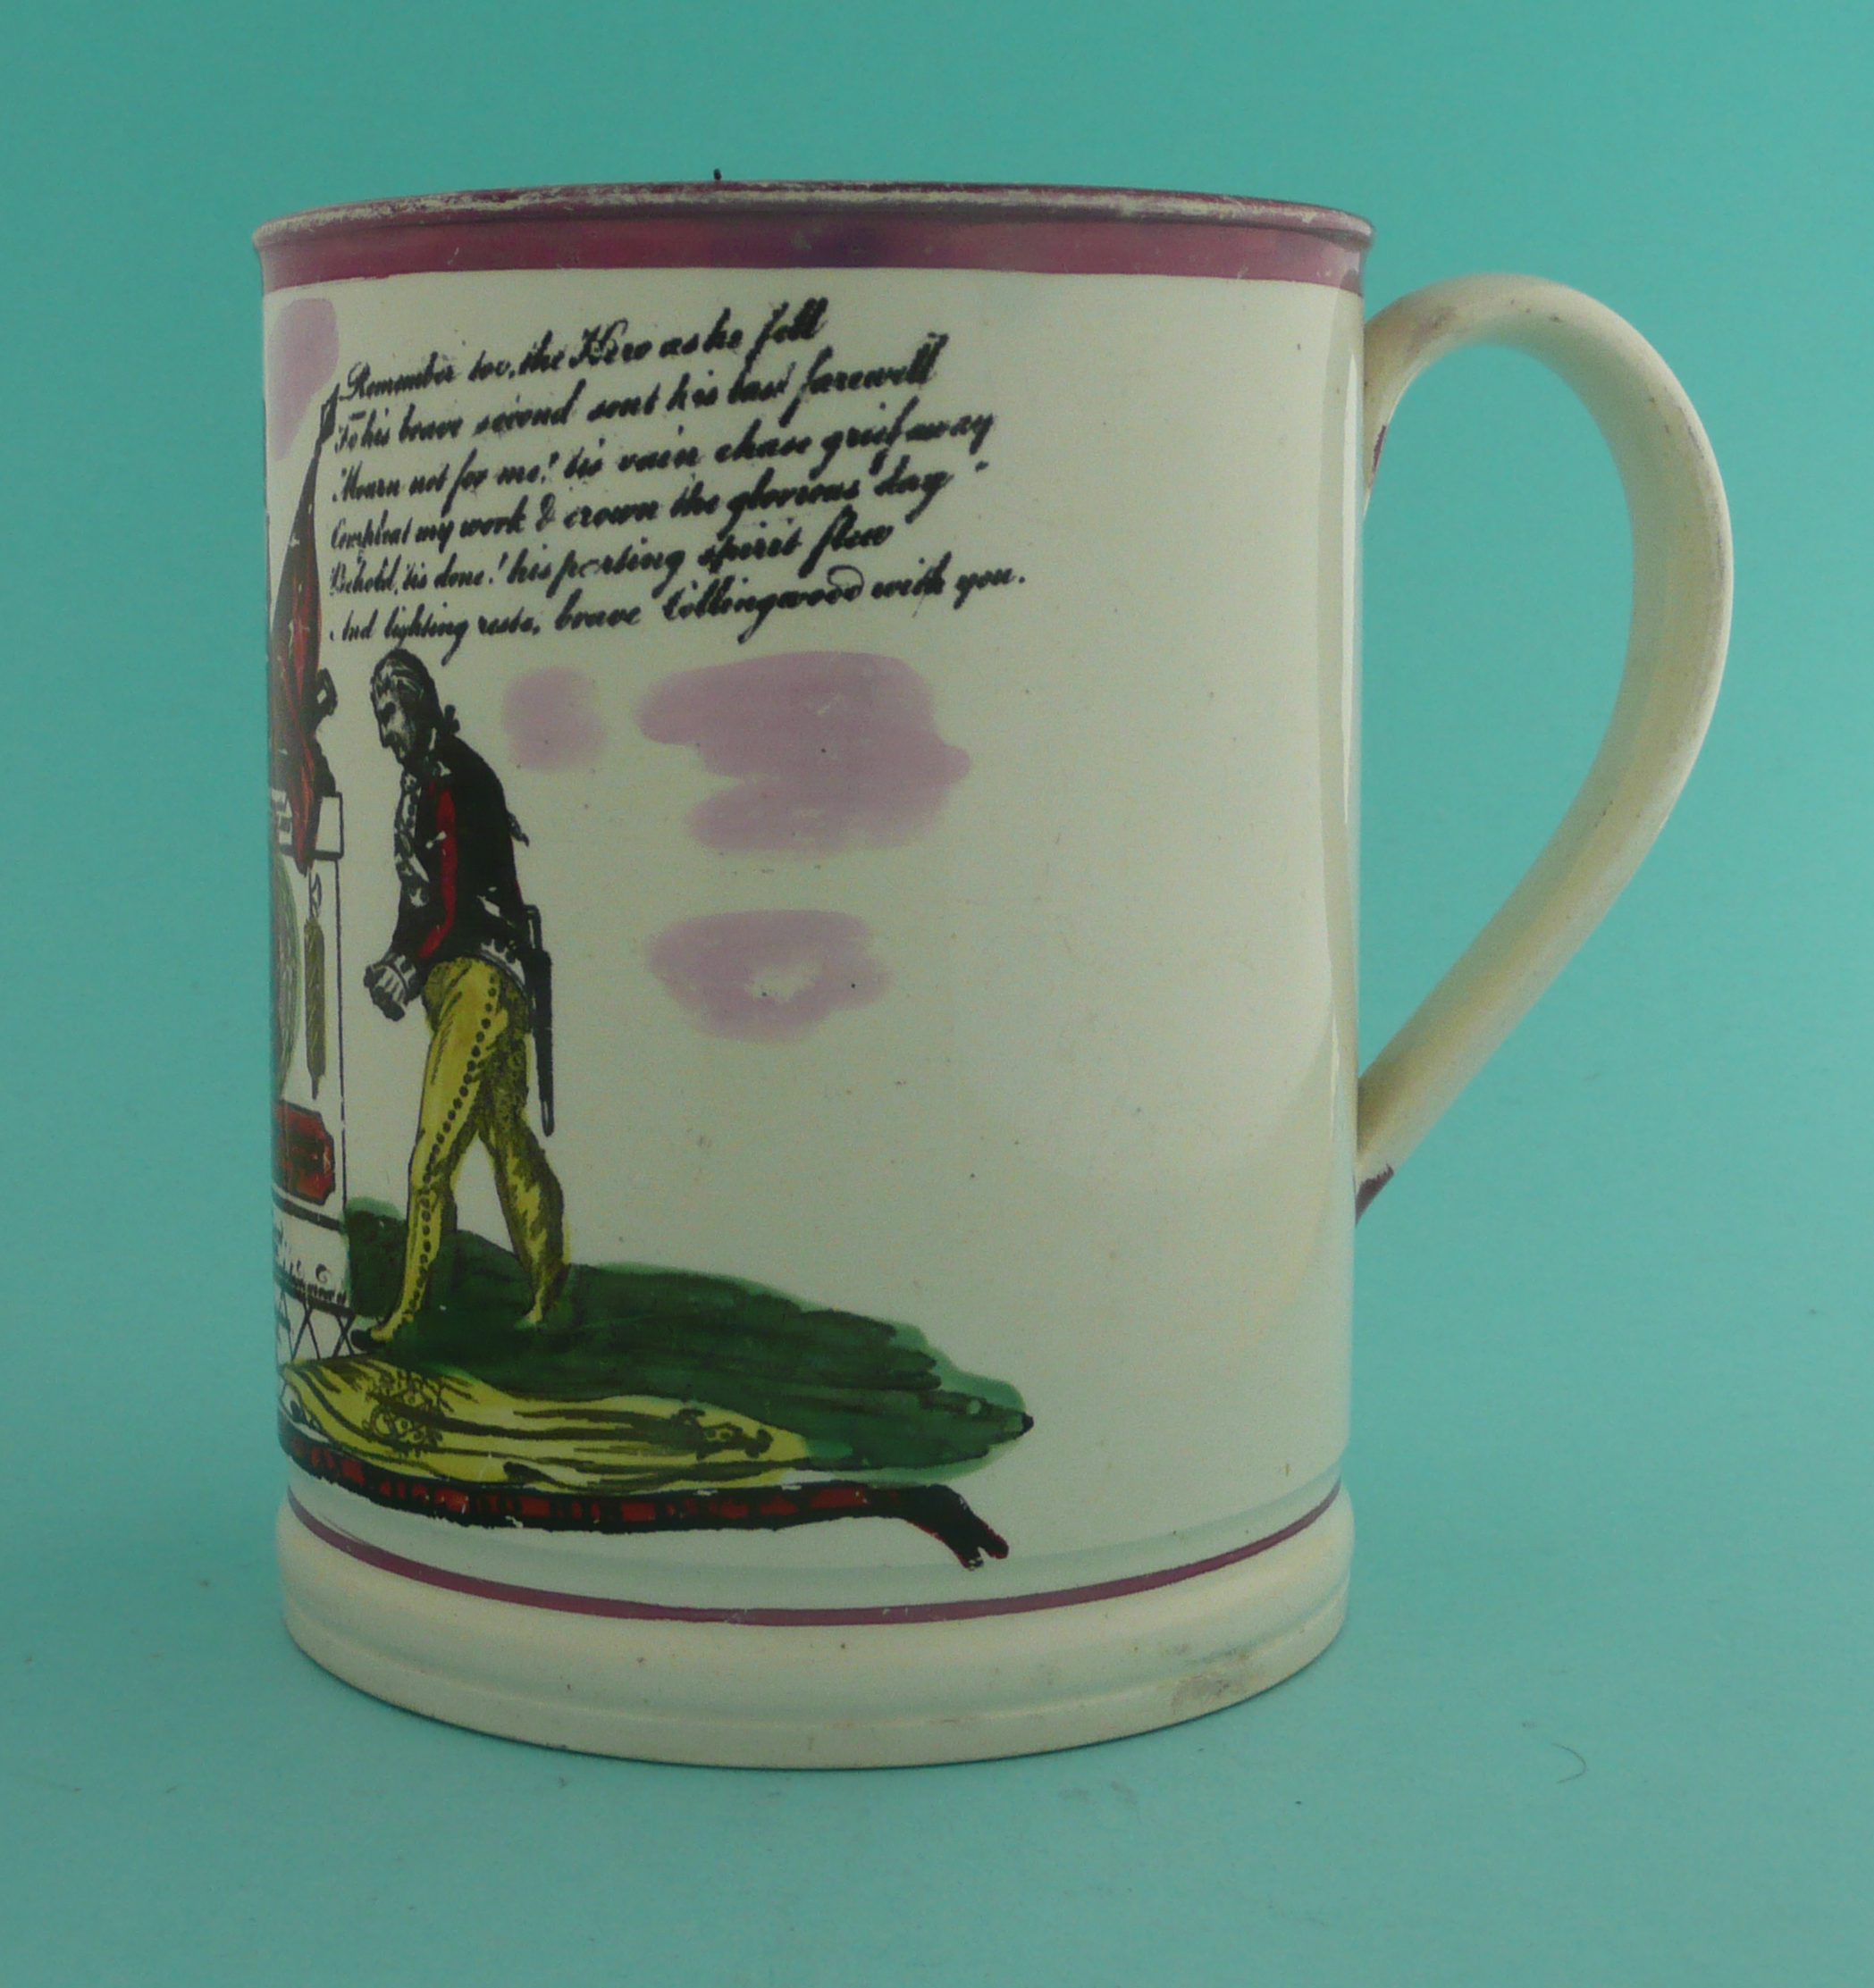 1805 Nelson in Memoriam: a pink lustre mug by J. Warburton of Newcastle upon Tyne printed in black - Image 2 of 4